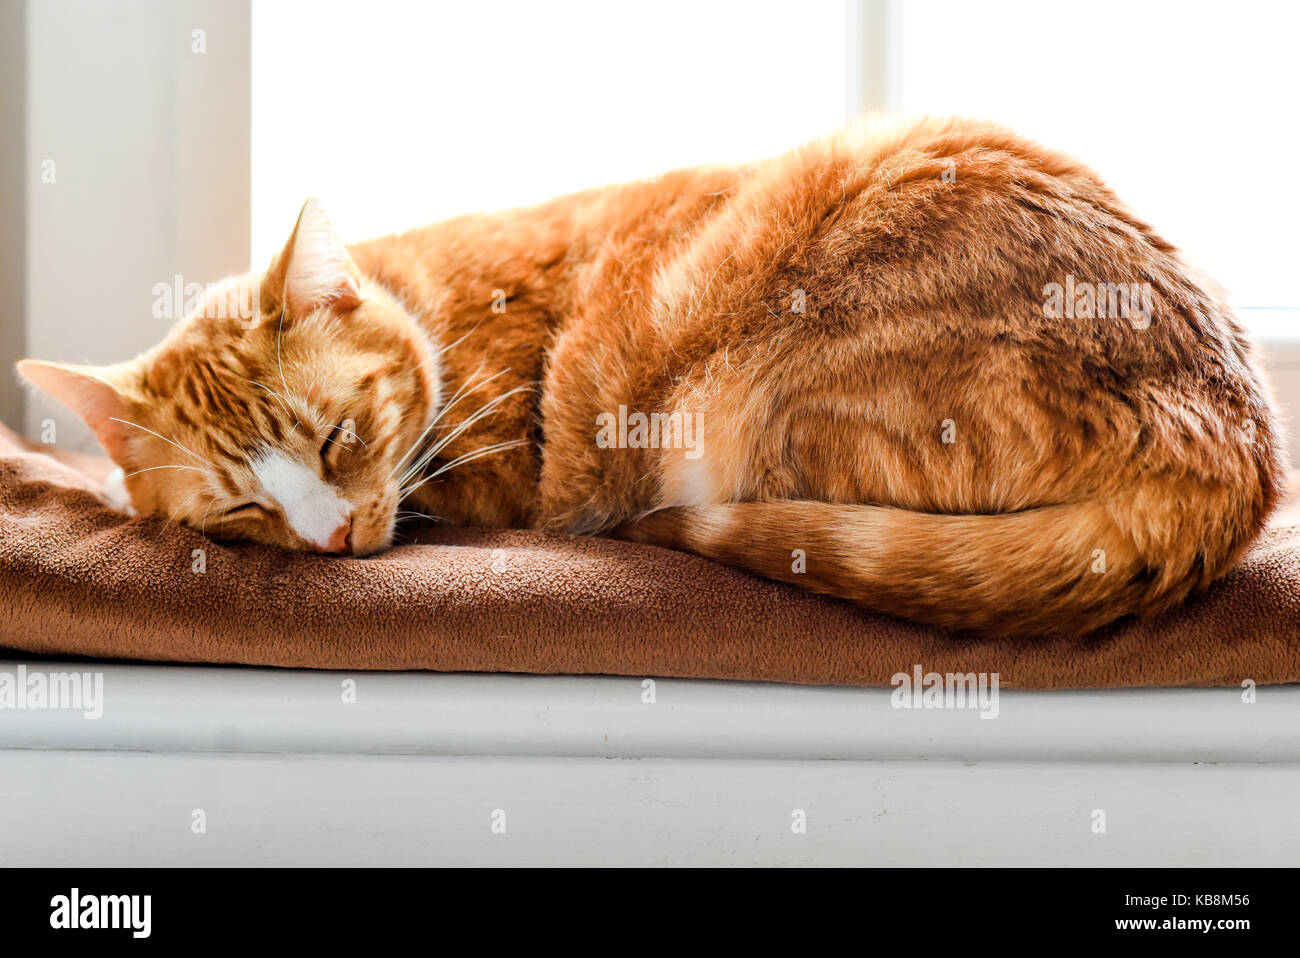 A young cat sleeping on a couch at home, sweet and beautiful Stock ...